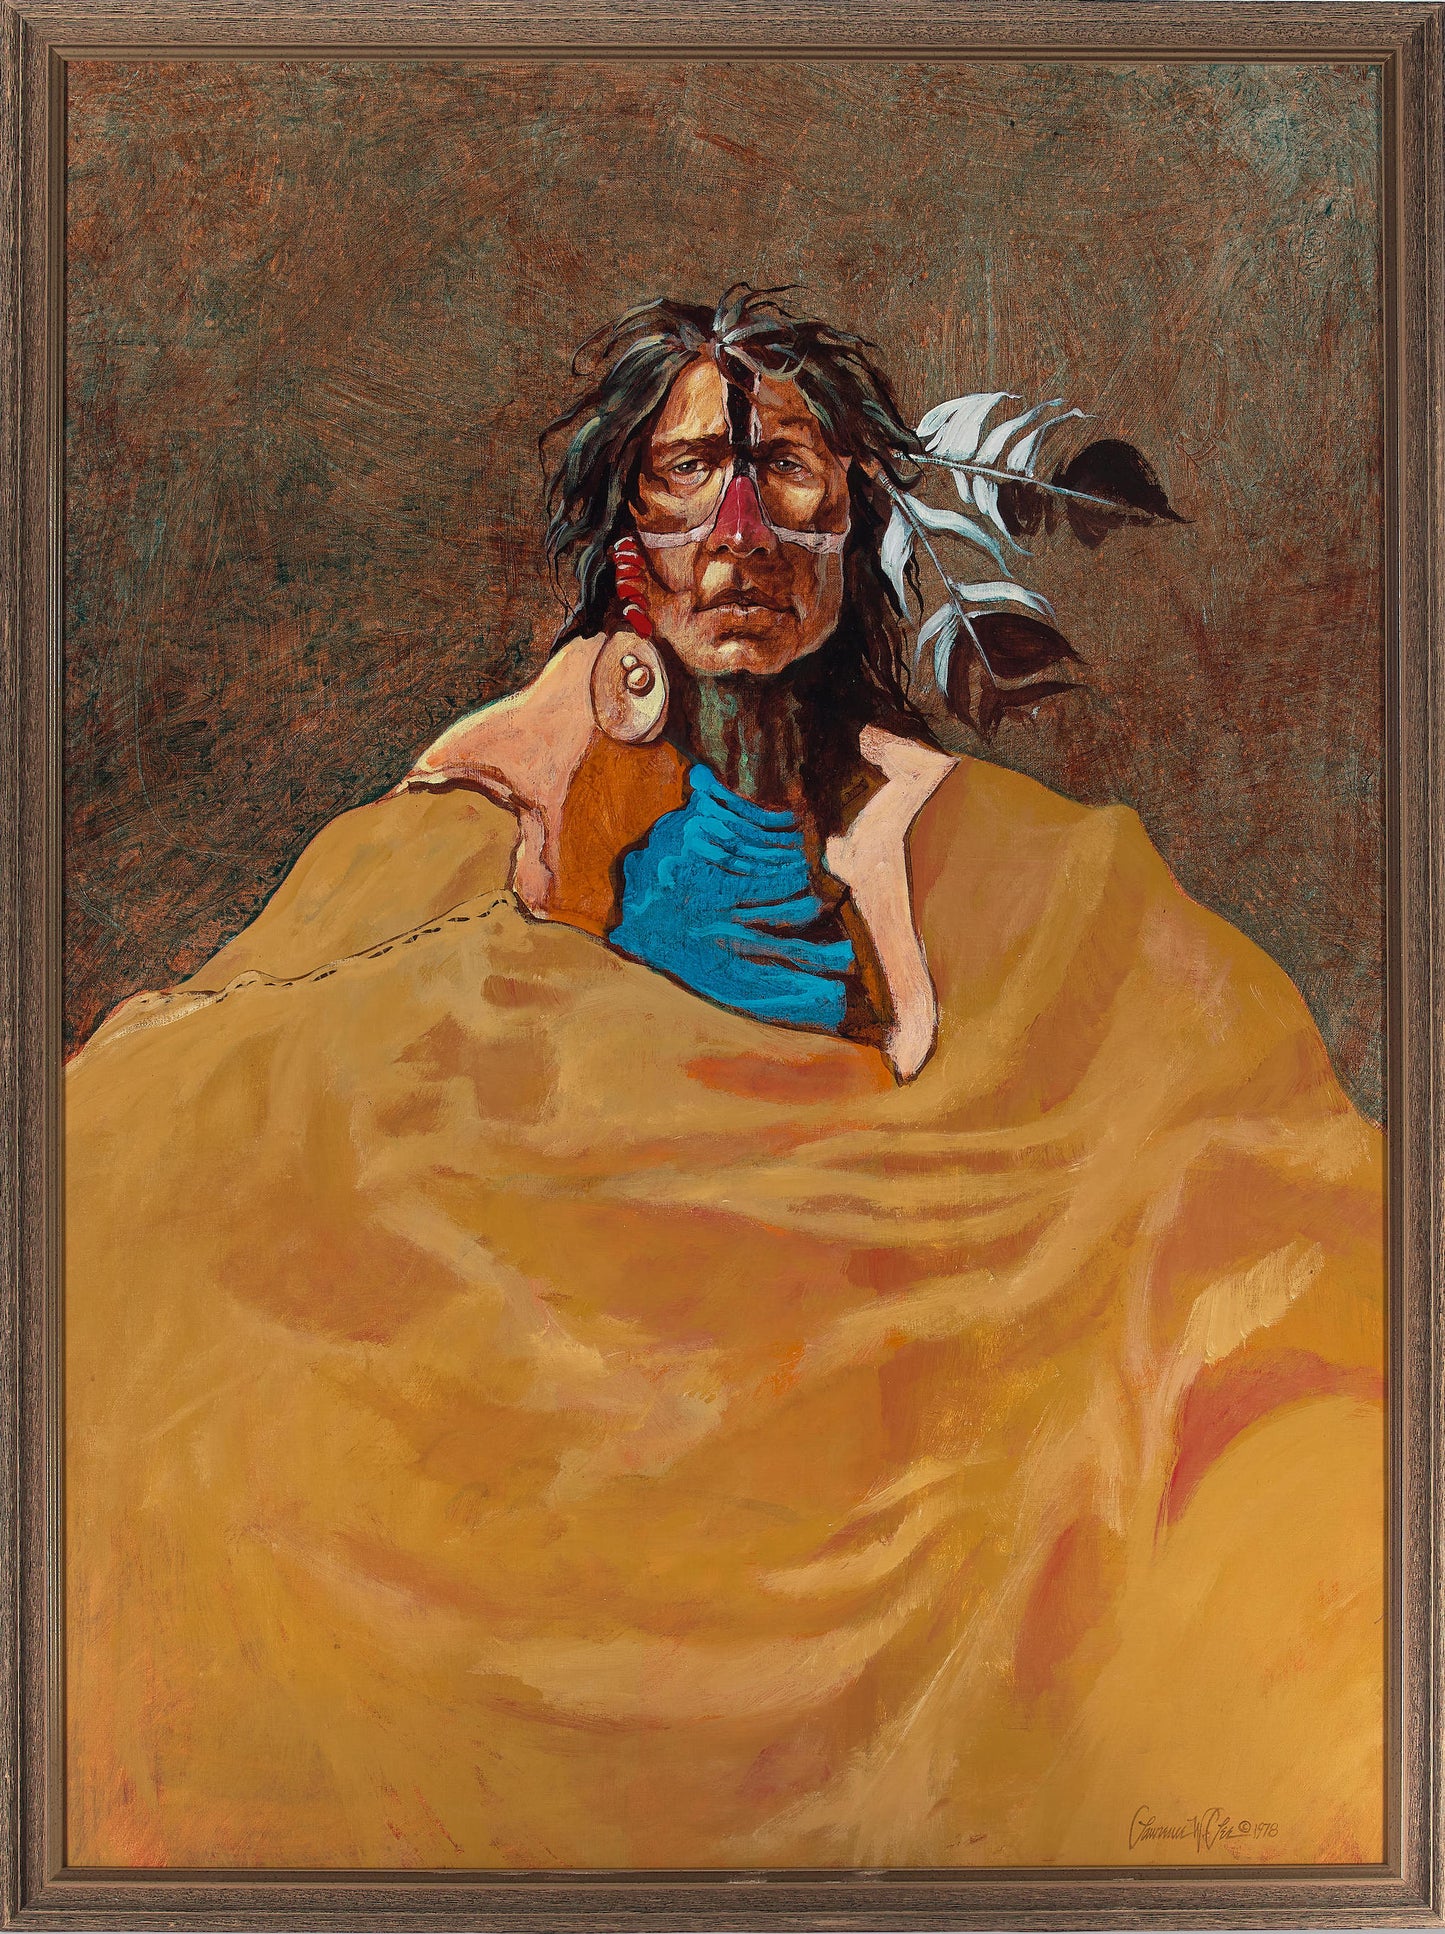 Lawrence W. Lee - Portrait of a Native American Man 1978 40" x 29.5"